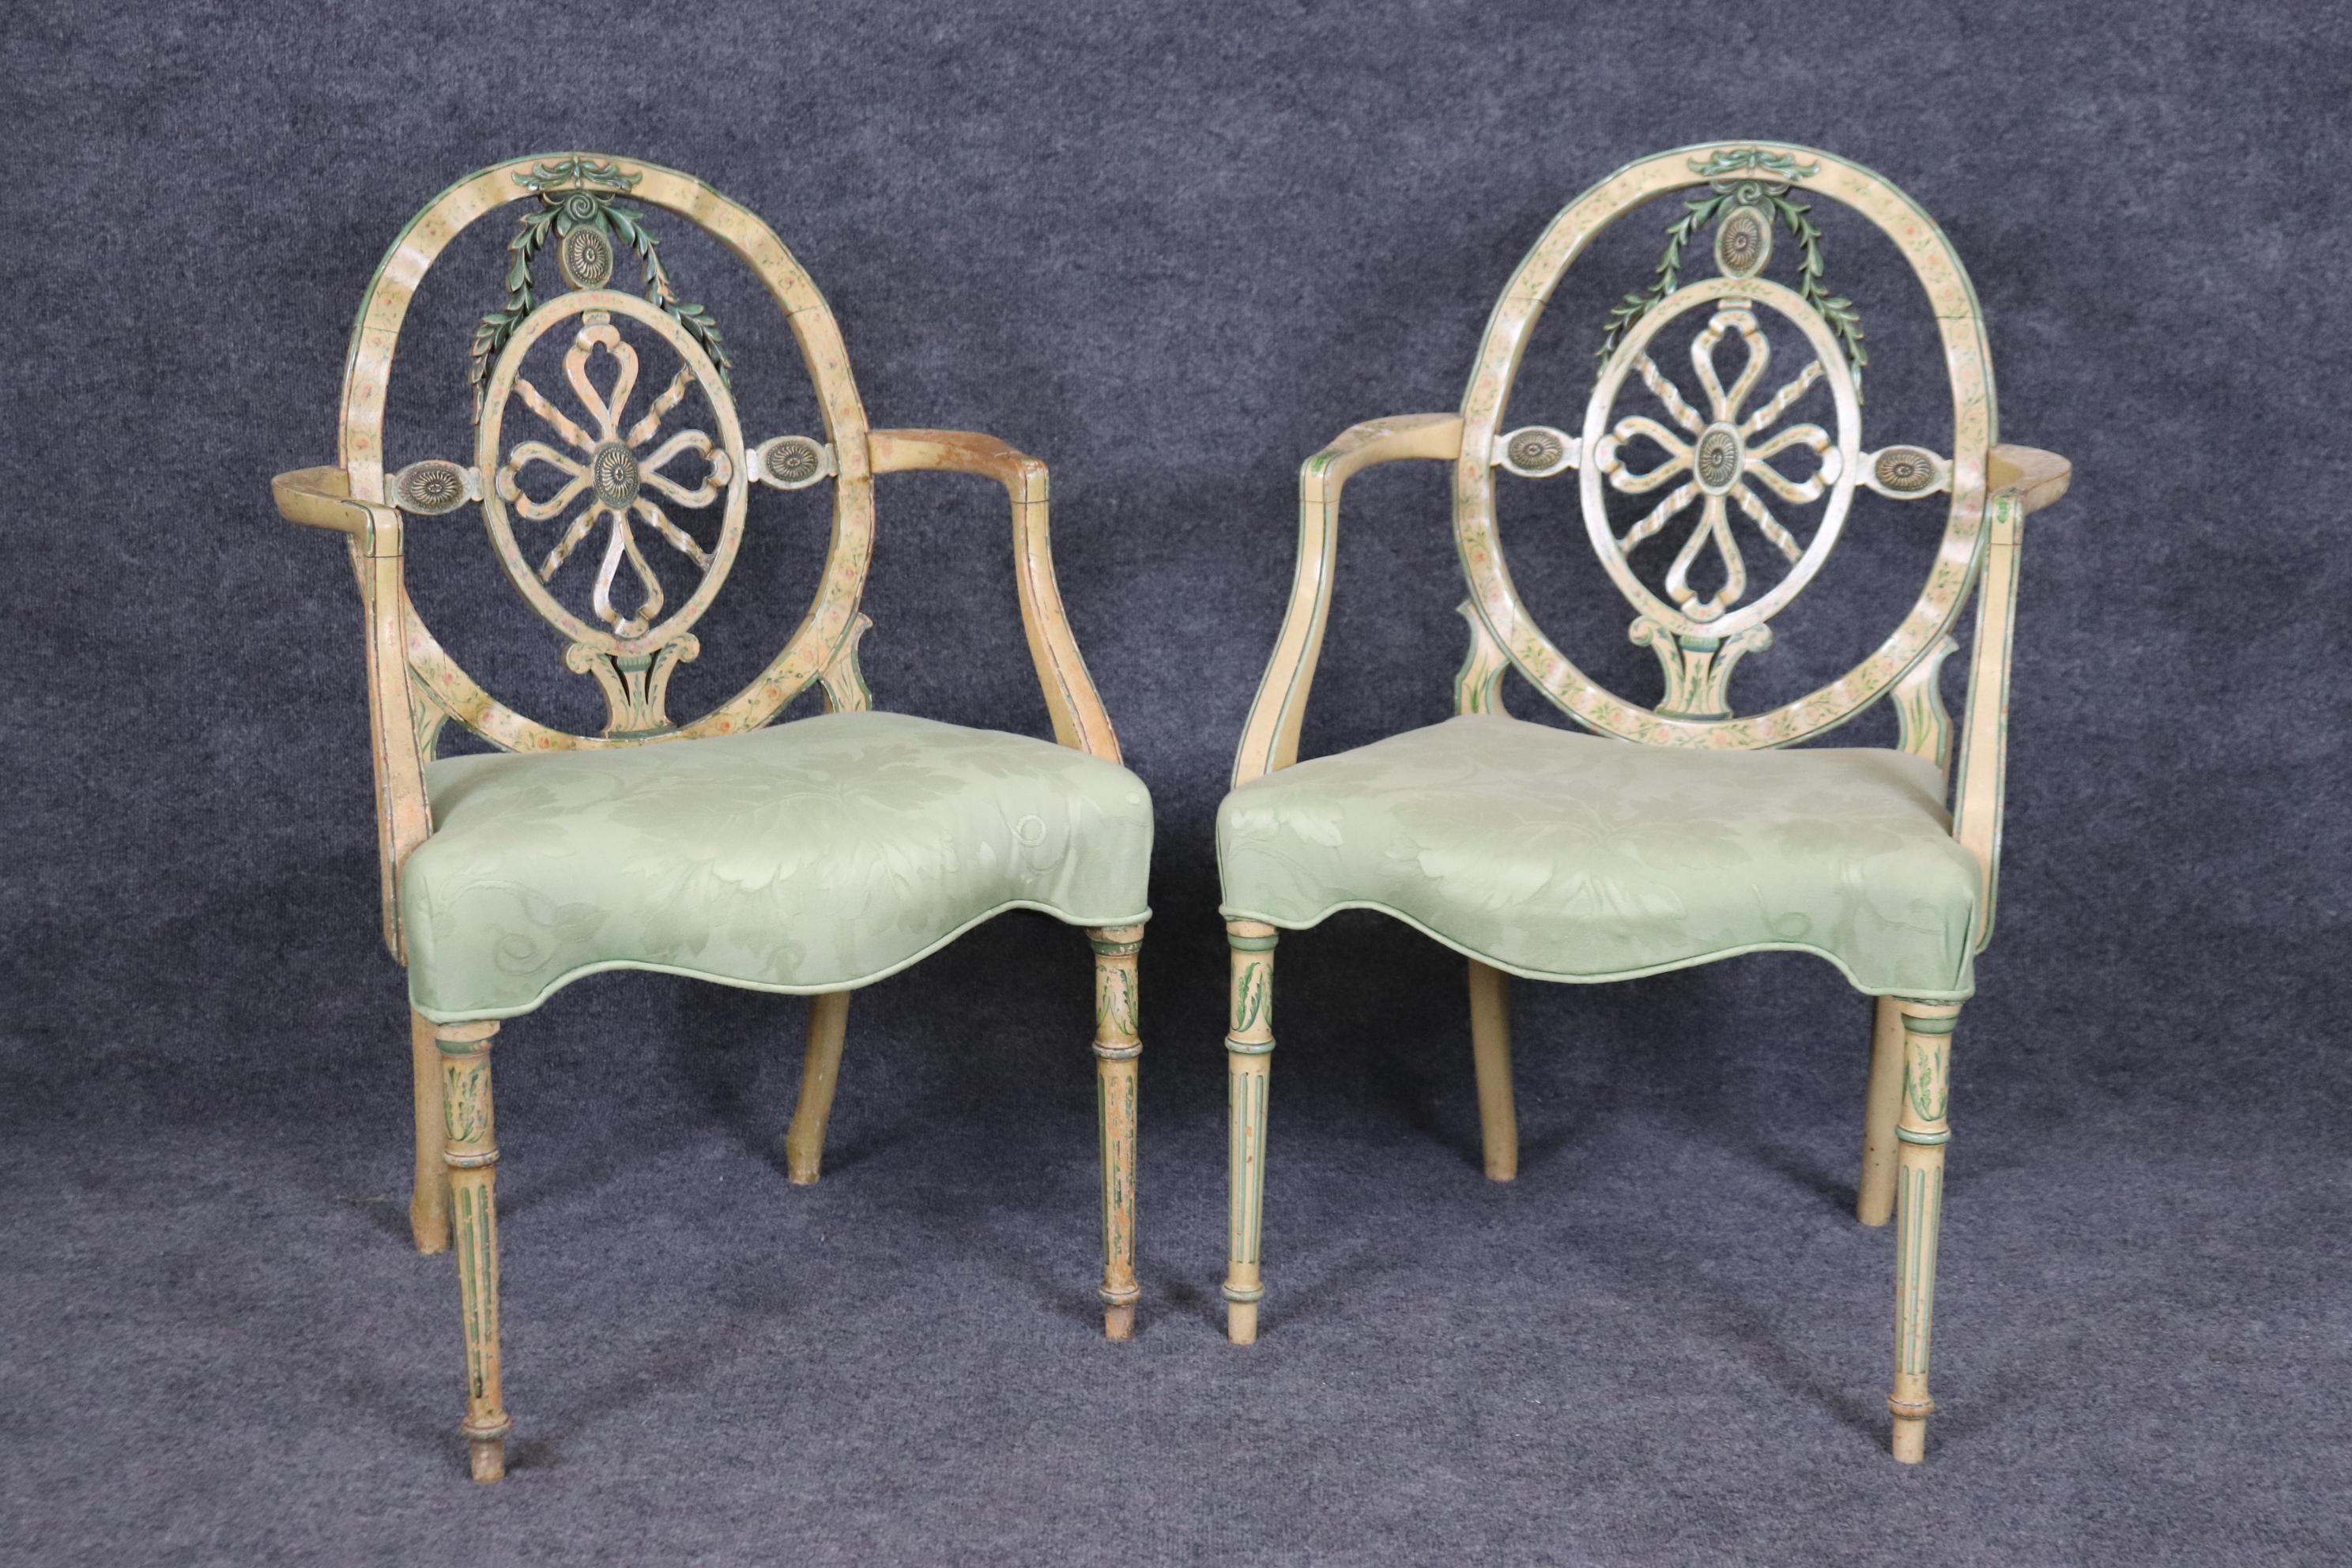 This is superb pair of English paint decorated Adams style chairs. The chairs are in good antique condition with fading and variations in the painted surfaces as we can see in the photos. The chairs upholstery is vintage so expect some stains or